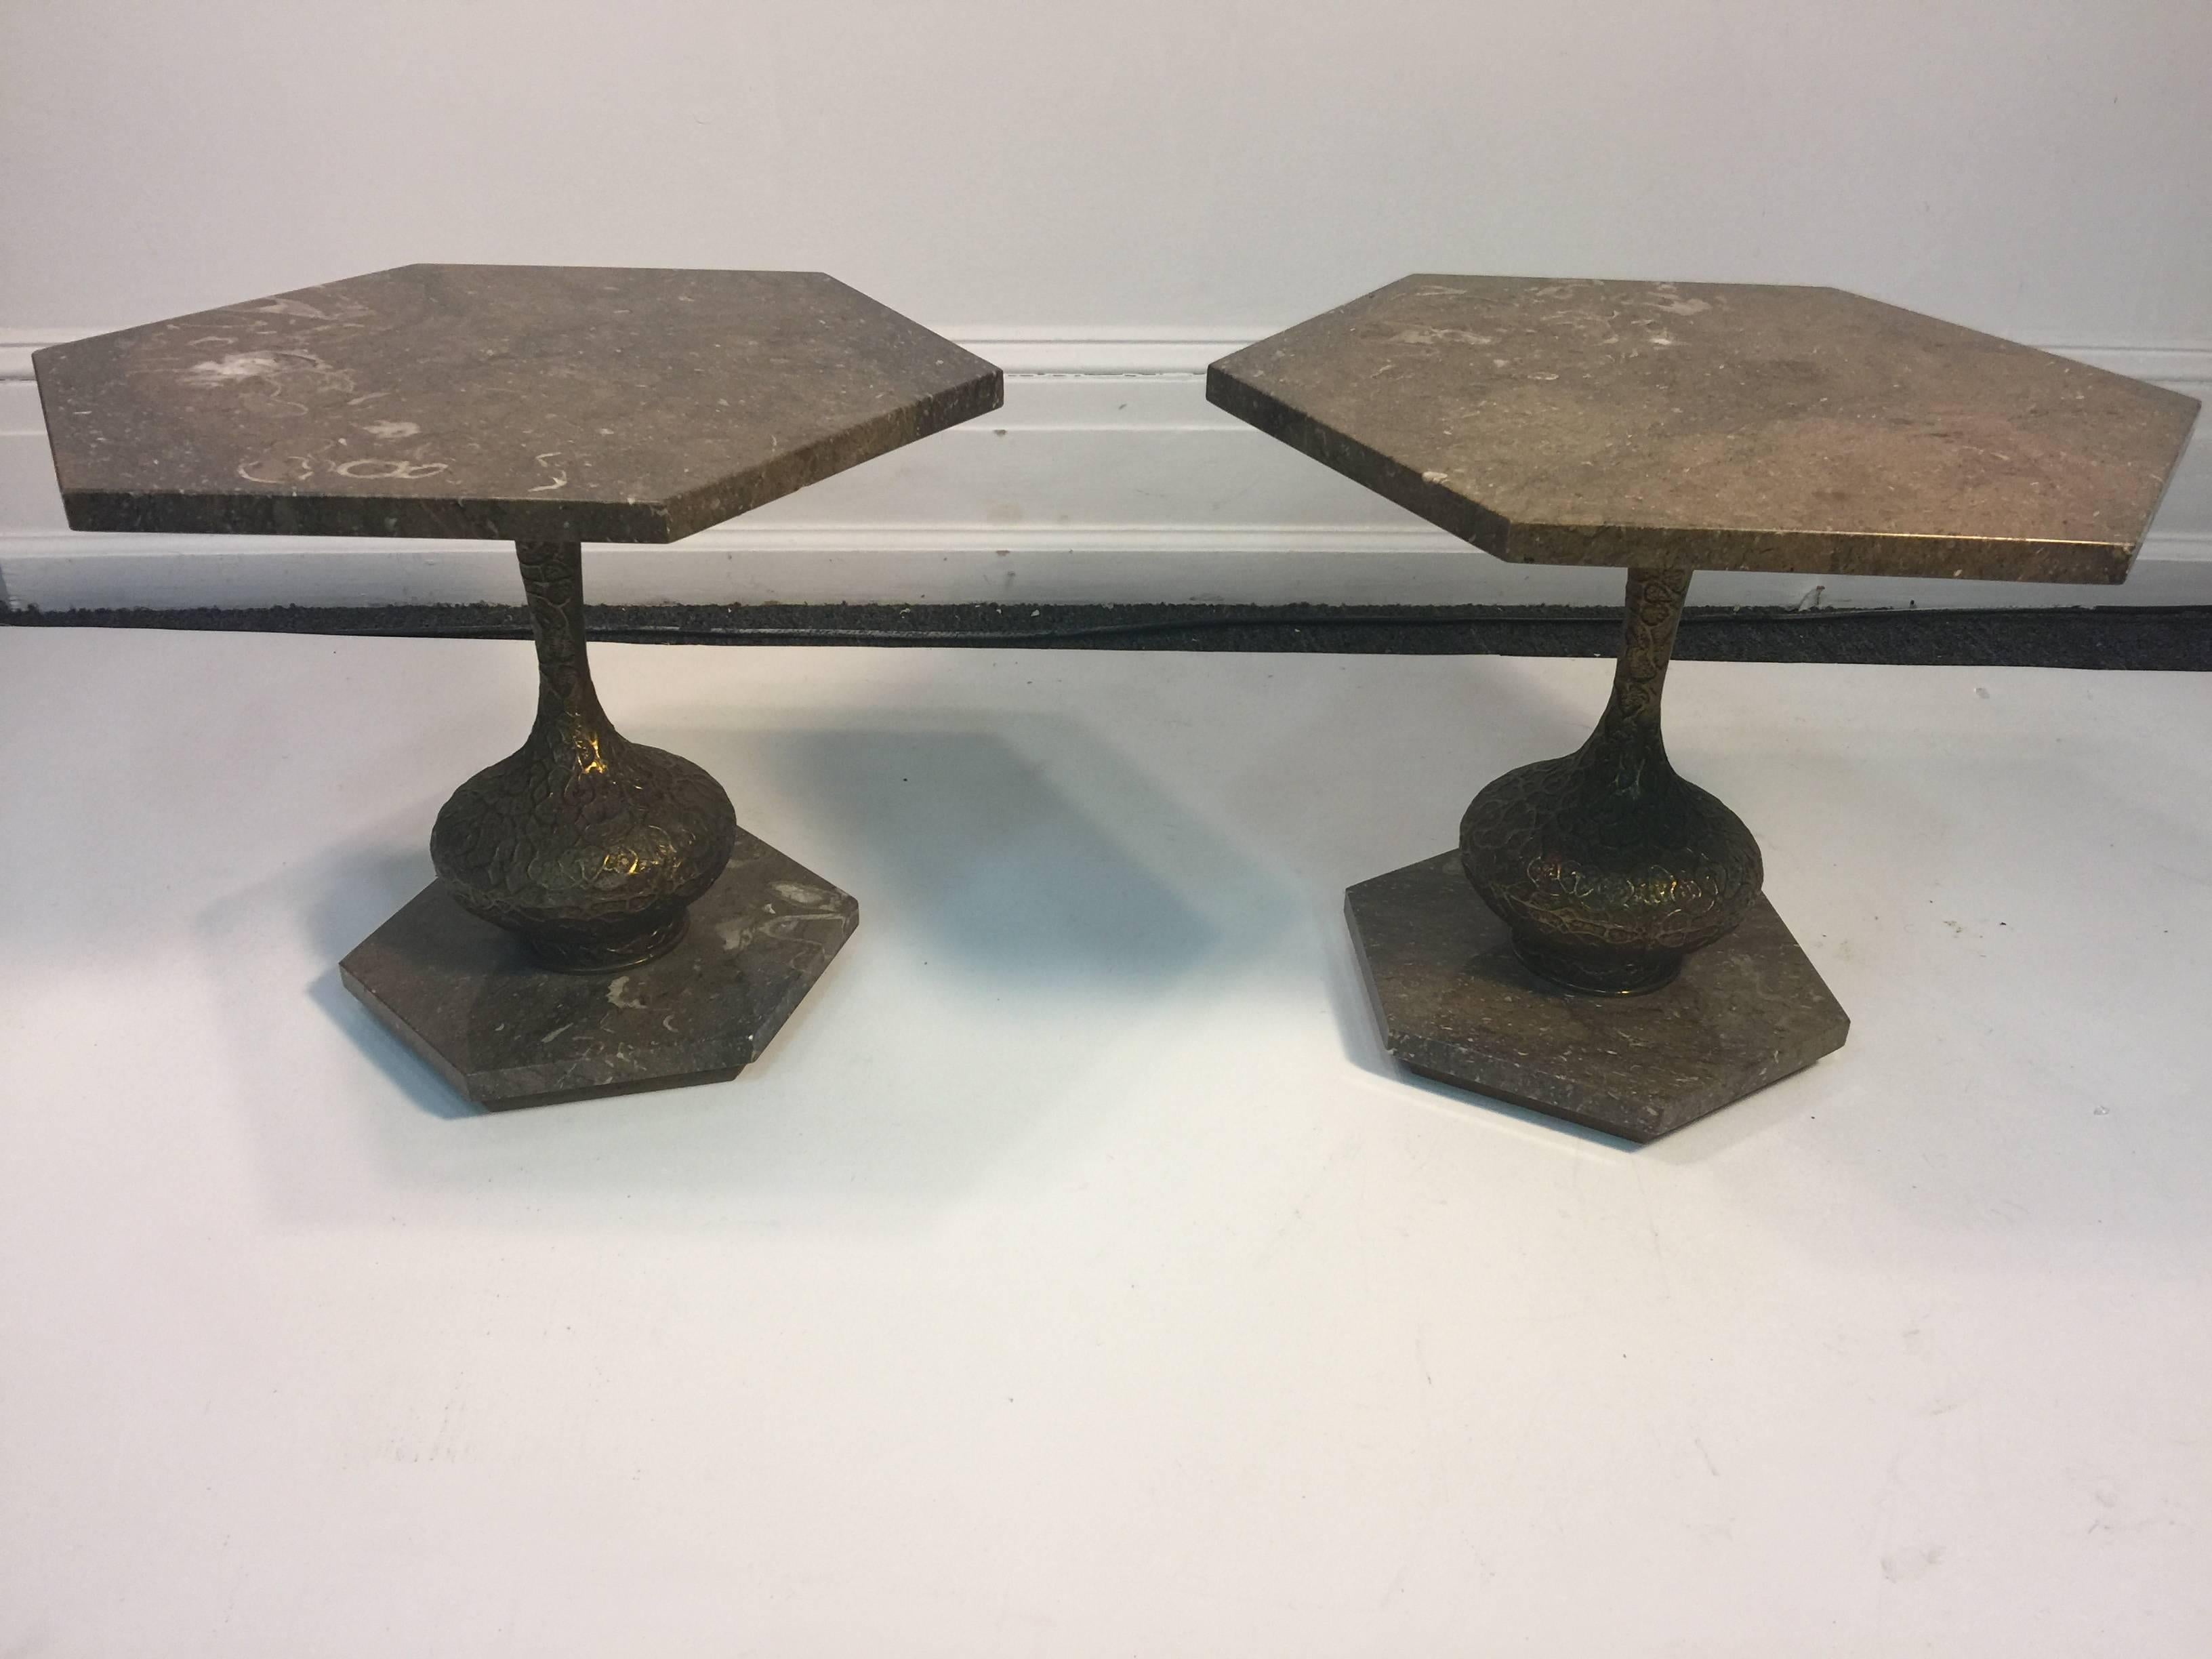 Pair of 1960s Italian tan hexagonal marble top tables with Brutalist gold tone metal bottle shape centre. The bases are smaller hexagonal matching marble bases. The marble top is 3/4